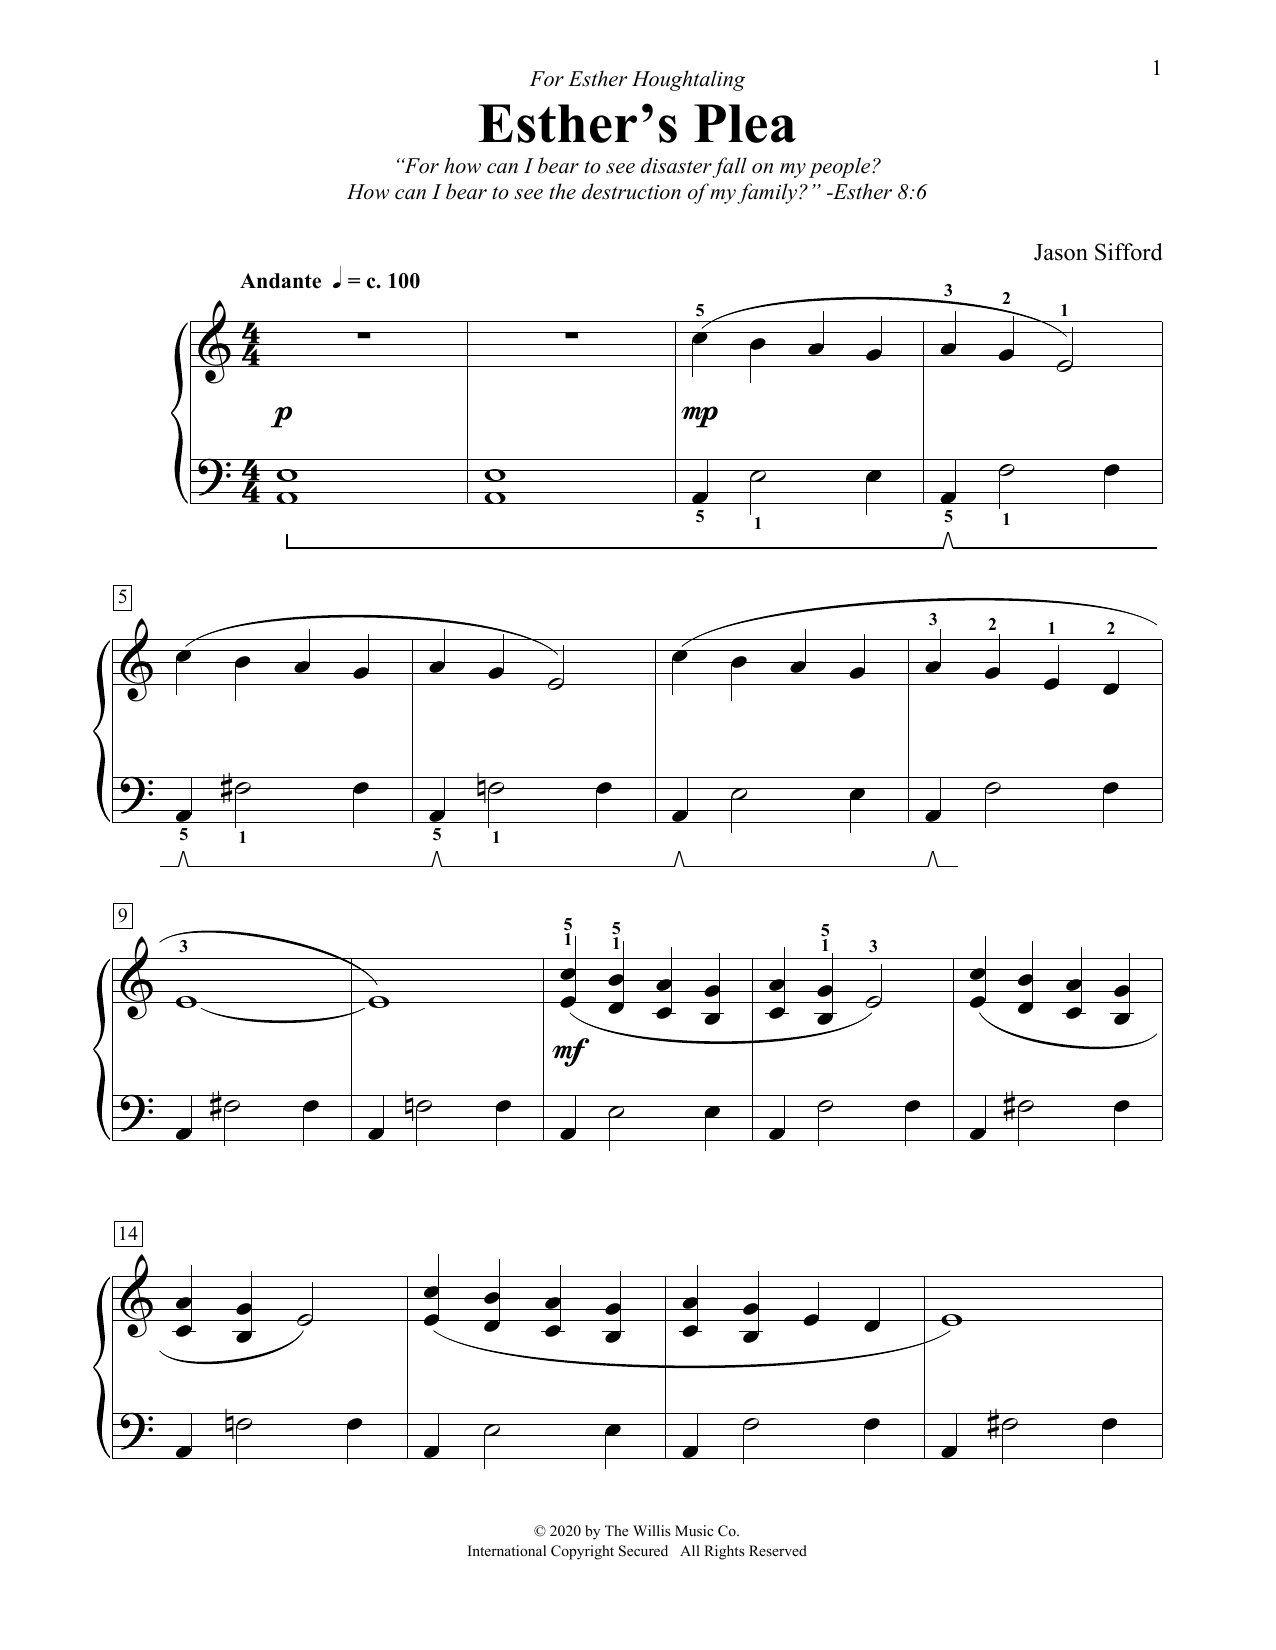 Download Jason Sifford Esther's Plea Sheet Music